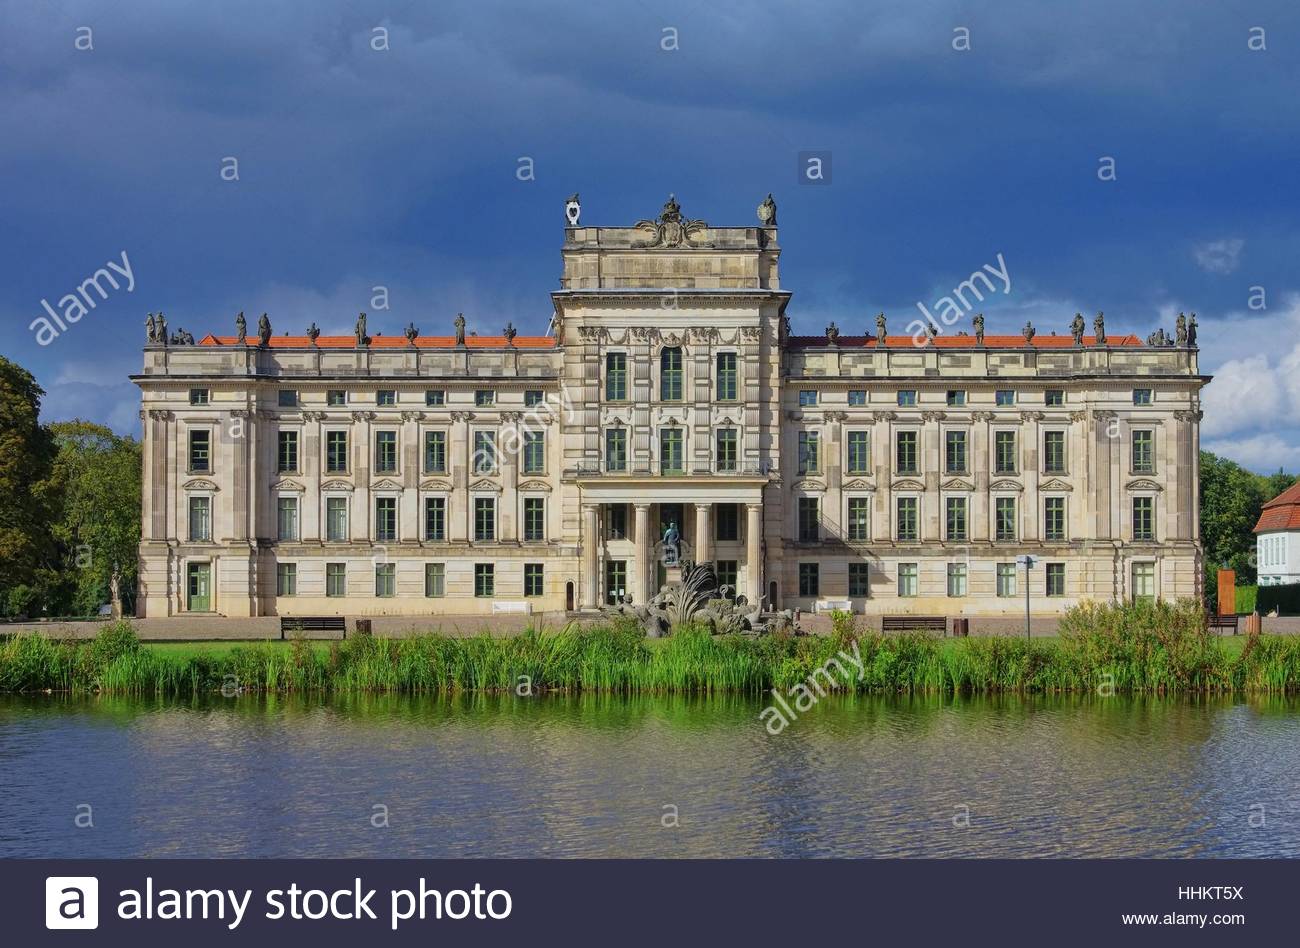 Ludwigslust Palace Backgrounds on Wallpapers Vista